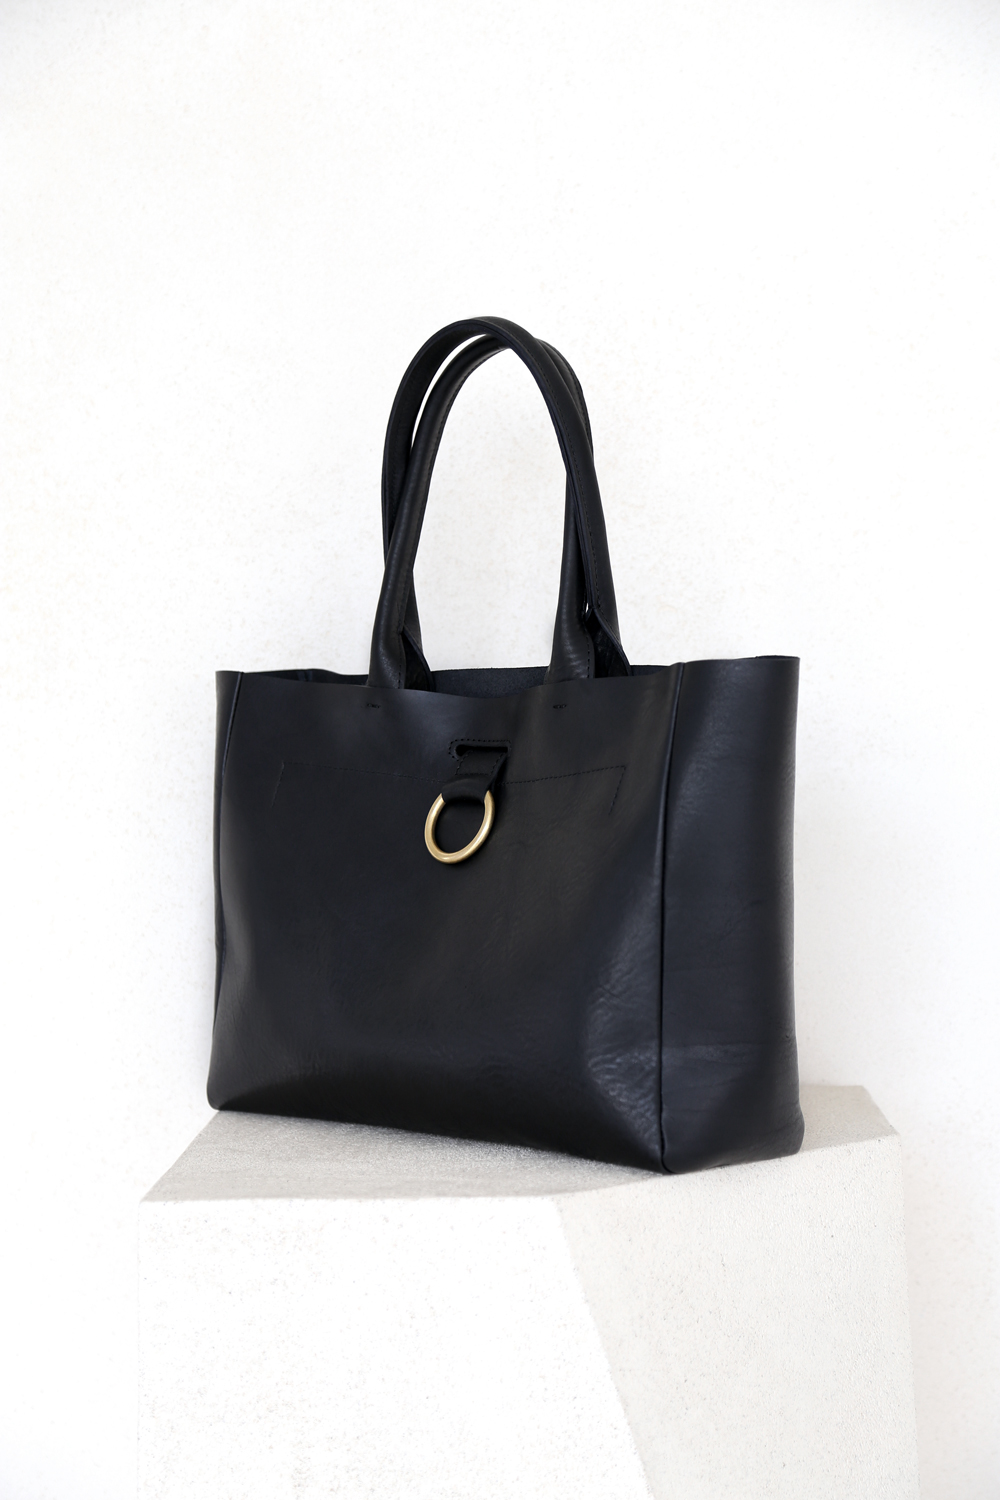 Ring Tote Black - Corîu - Leather Bags